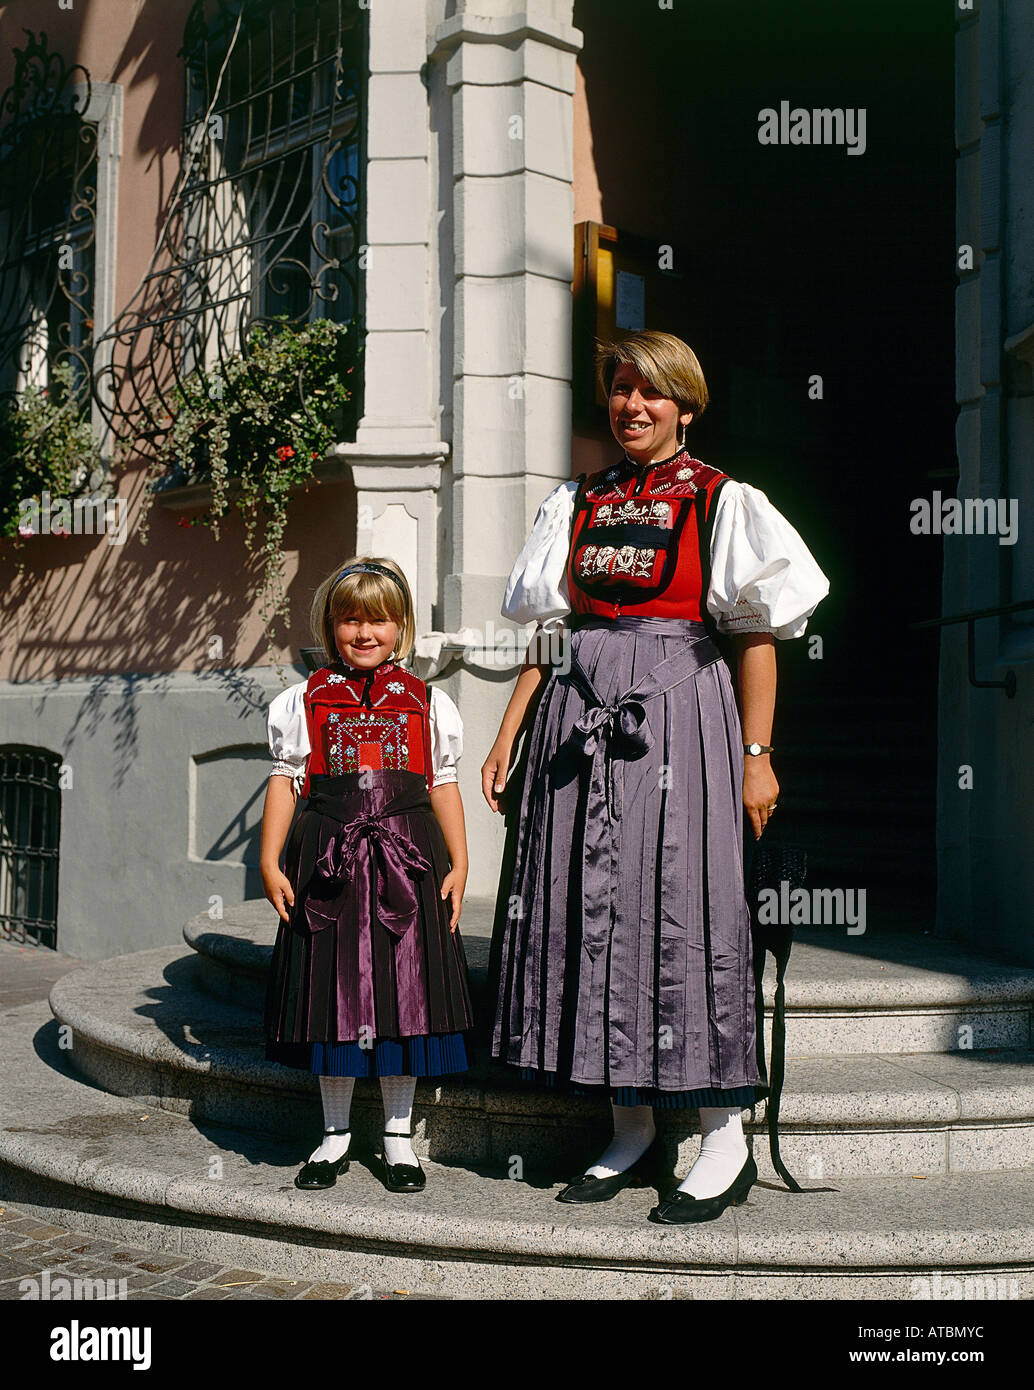 A young local woman and a small girl dressed in colourful national costume in the doorway of a building at Waldshut in southwestern Germany Stock Photo